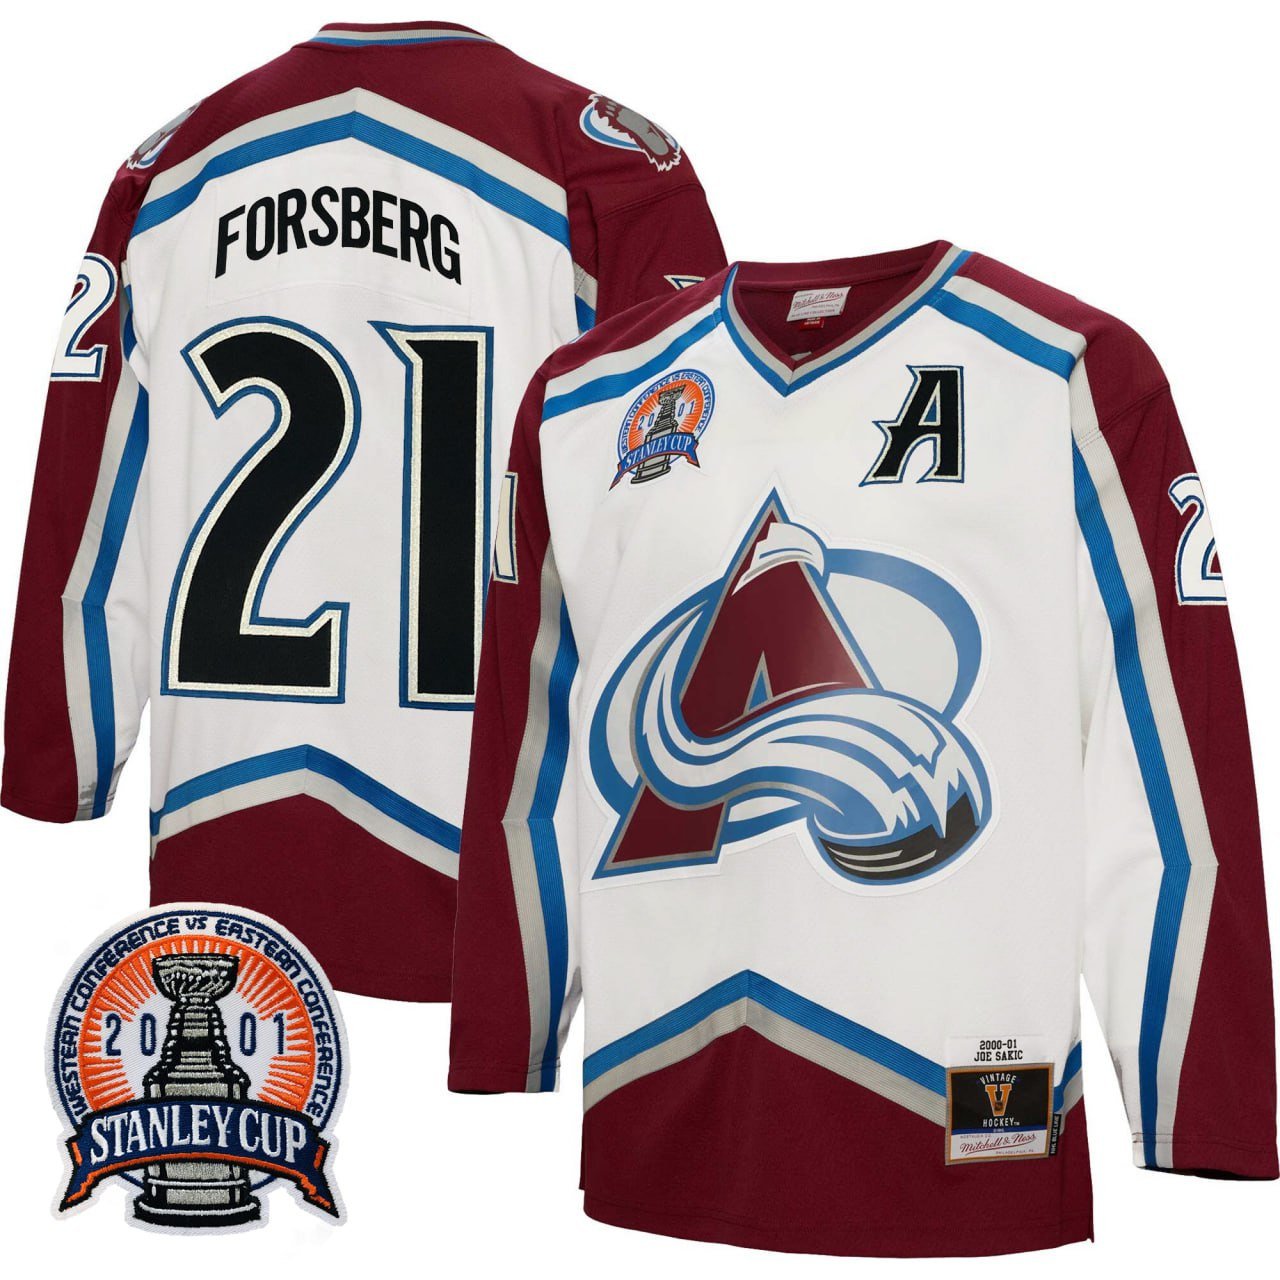 Peter Forsberg Colorado Avalanche Signed 2001 Stanley Cup Jersey